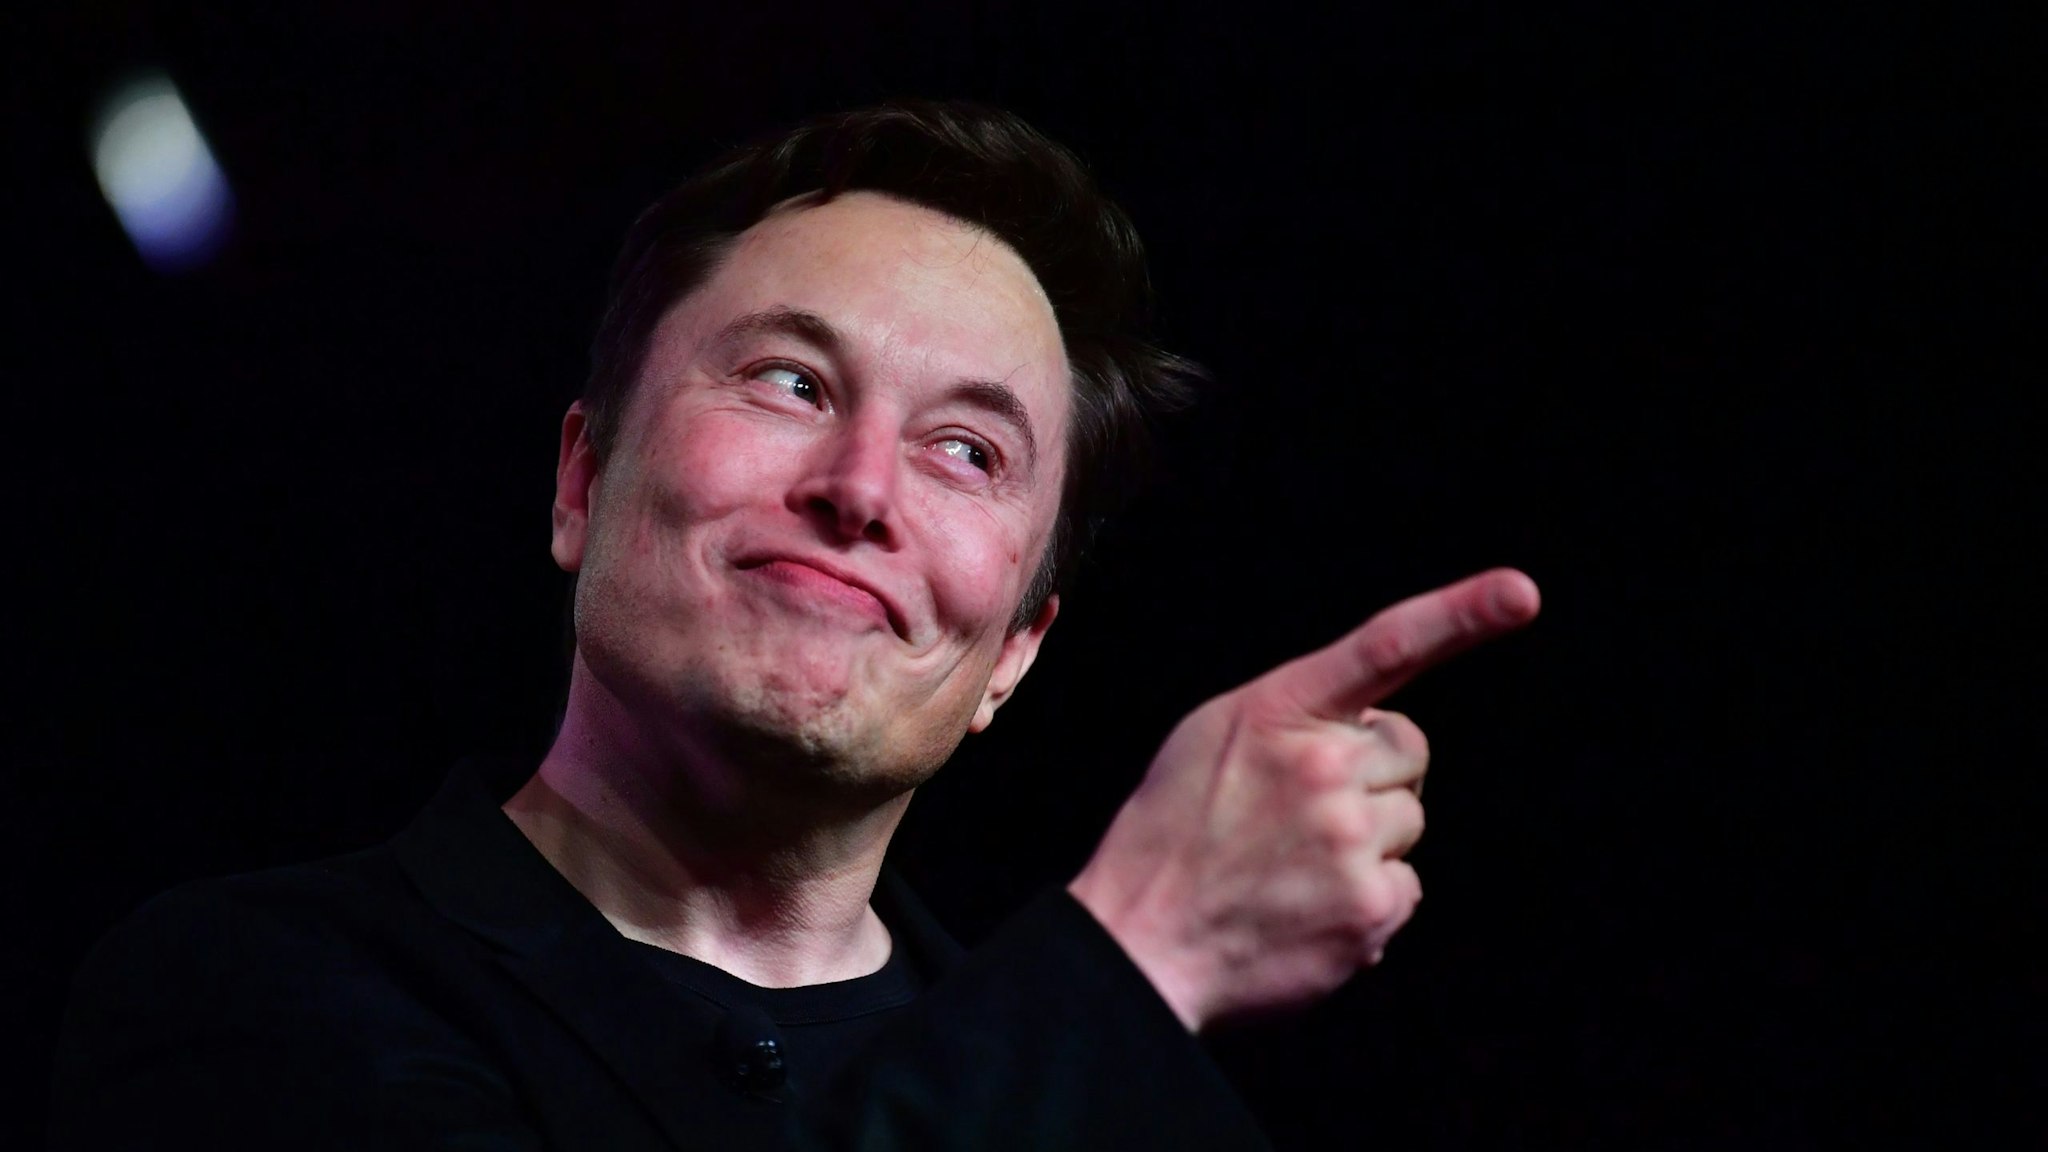 esla CEO Elon Musk speaks during the unveiling of the new Tesla Model Y in Hawthorne, California on March 14, 2019. (Photo by Frederic J. BROWN / AFP) (Photo credit should read FREDERIC J. BROWN/AFP via Getty Images)